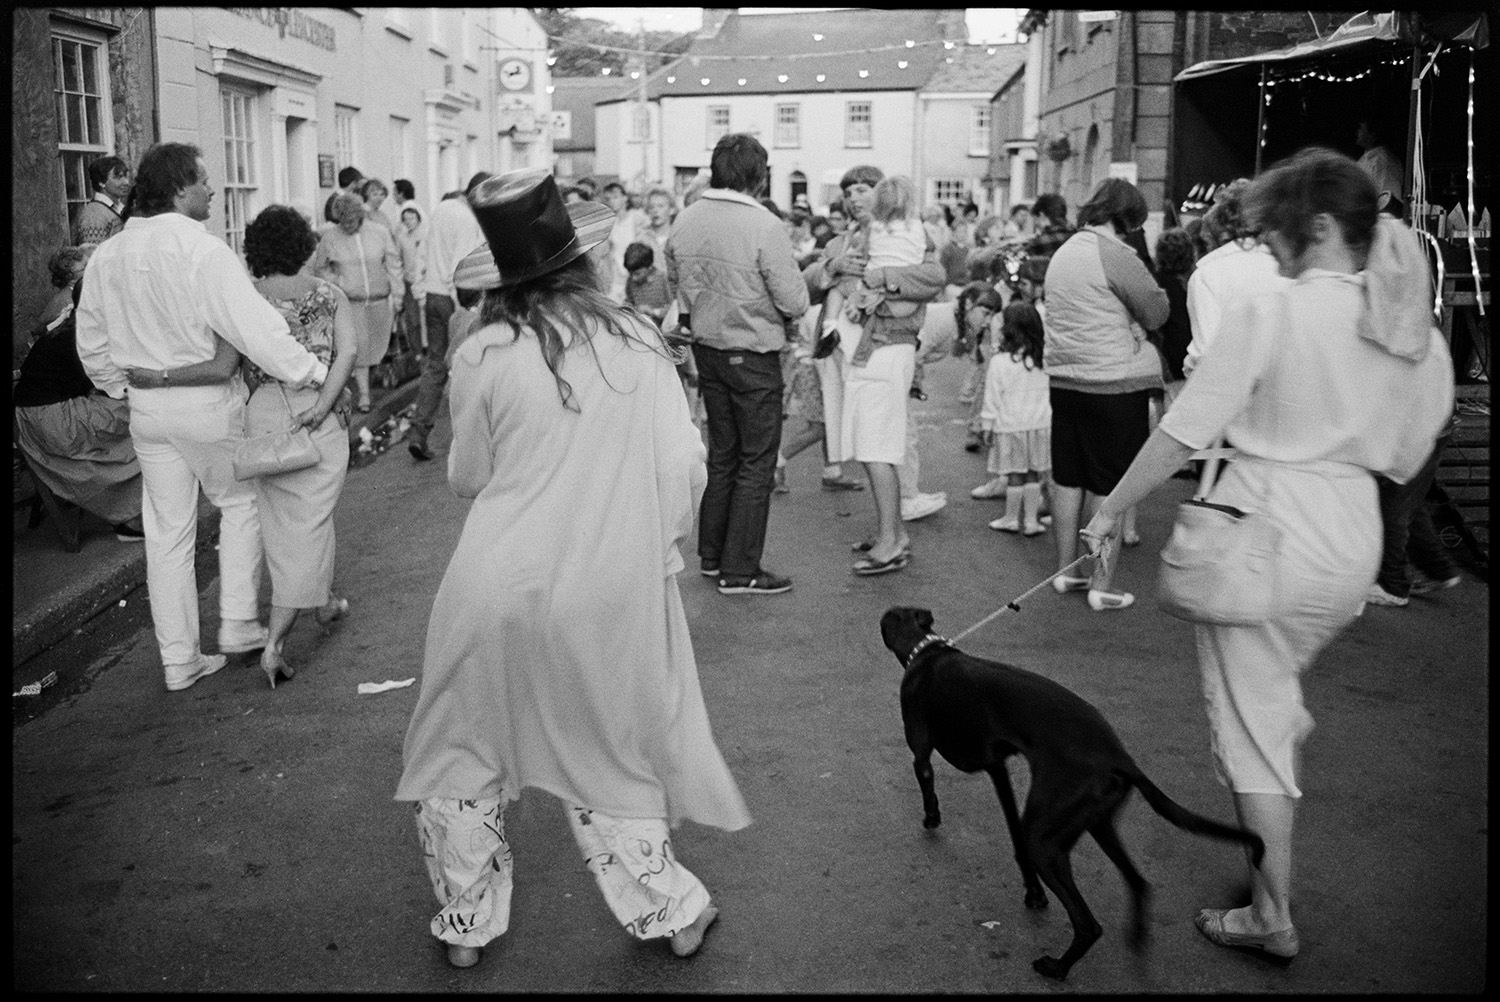 Dancing in the street at fair. Fancy dress.
[People dancing and standing at Chulmleigh Fair in Fore Street, Chulmleigh. The street is decorated with festoon lights.]